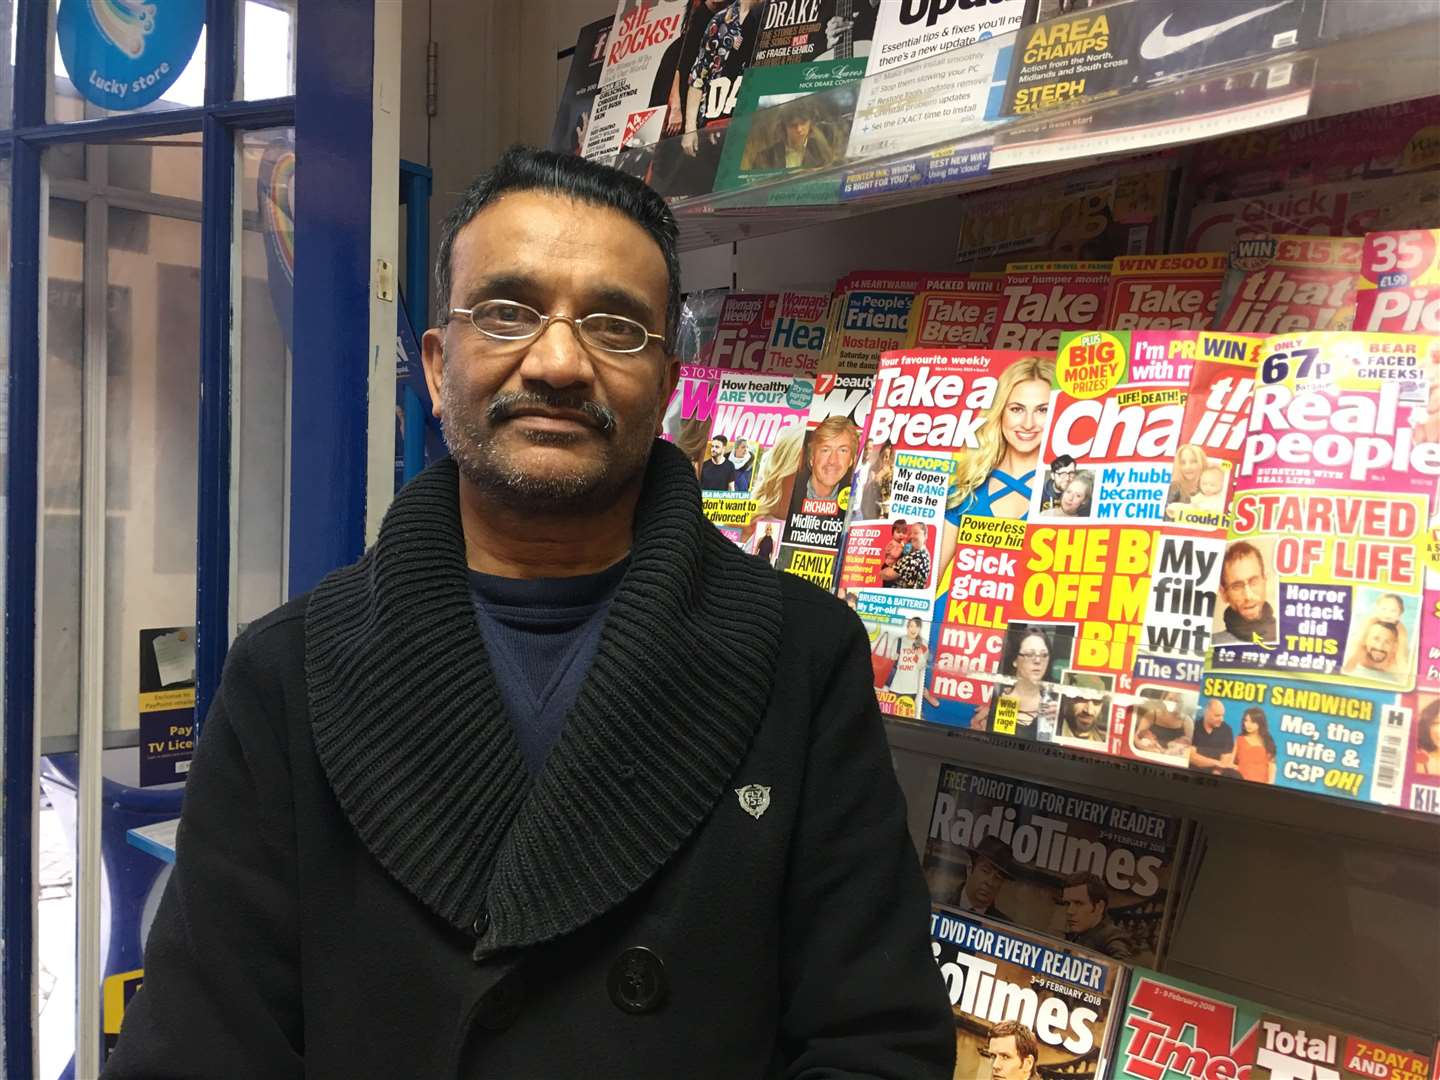 Shop owner Jitendra Patel is vowing to ramp up security at the premises